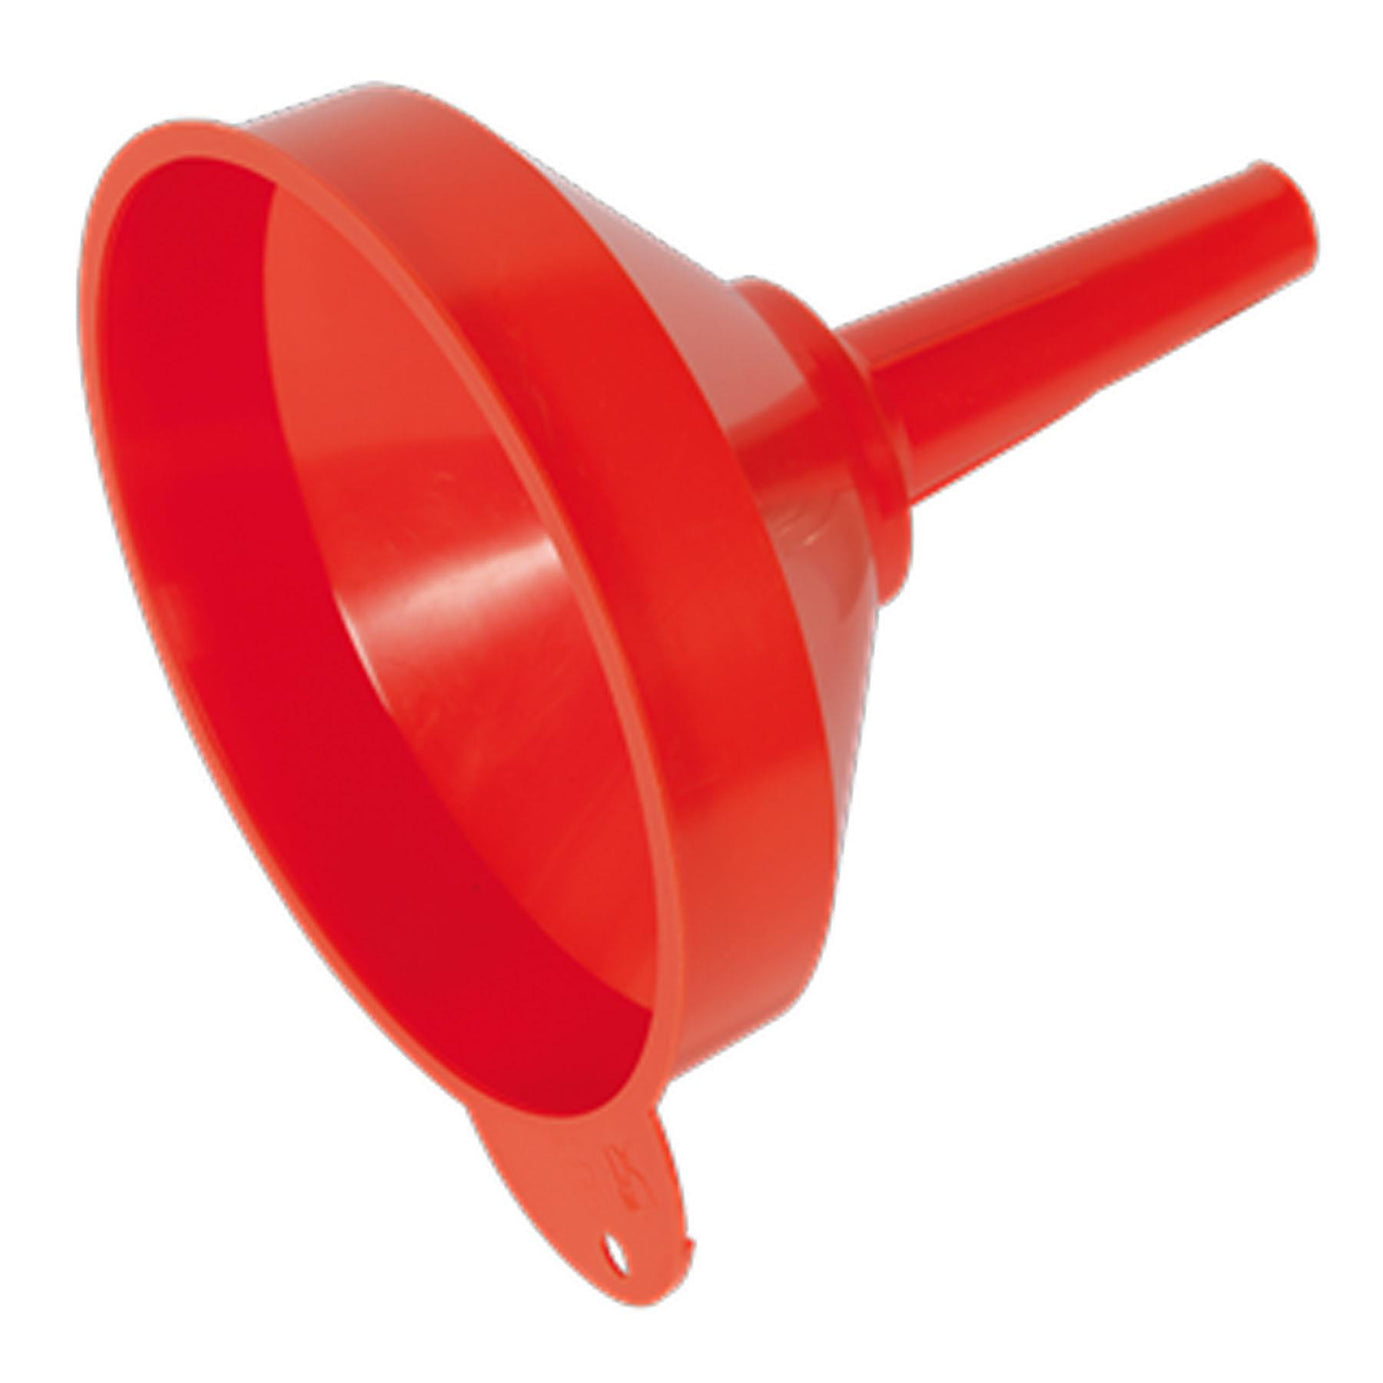 Sealey Funnel Medium �200mm Fixed Spout with Filter